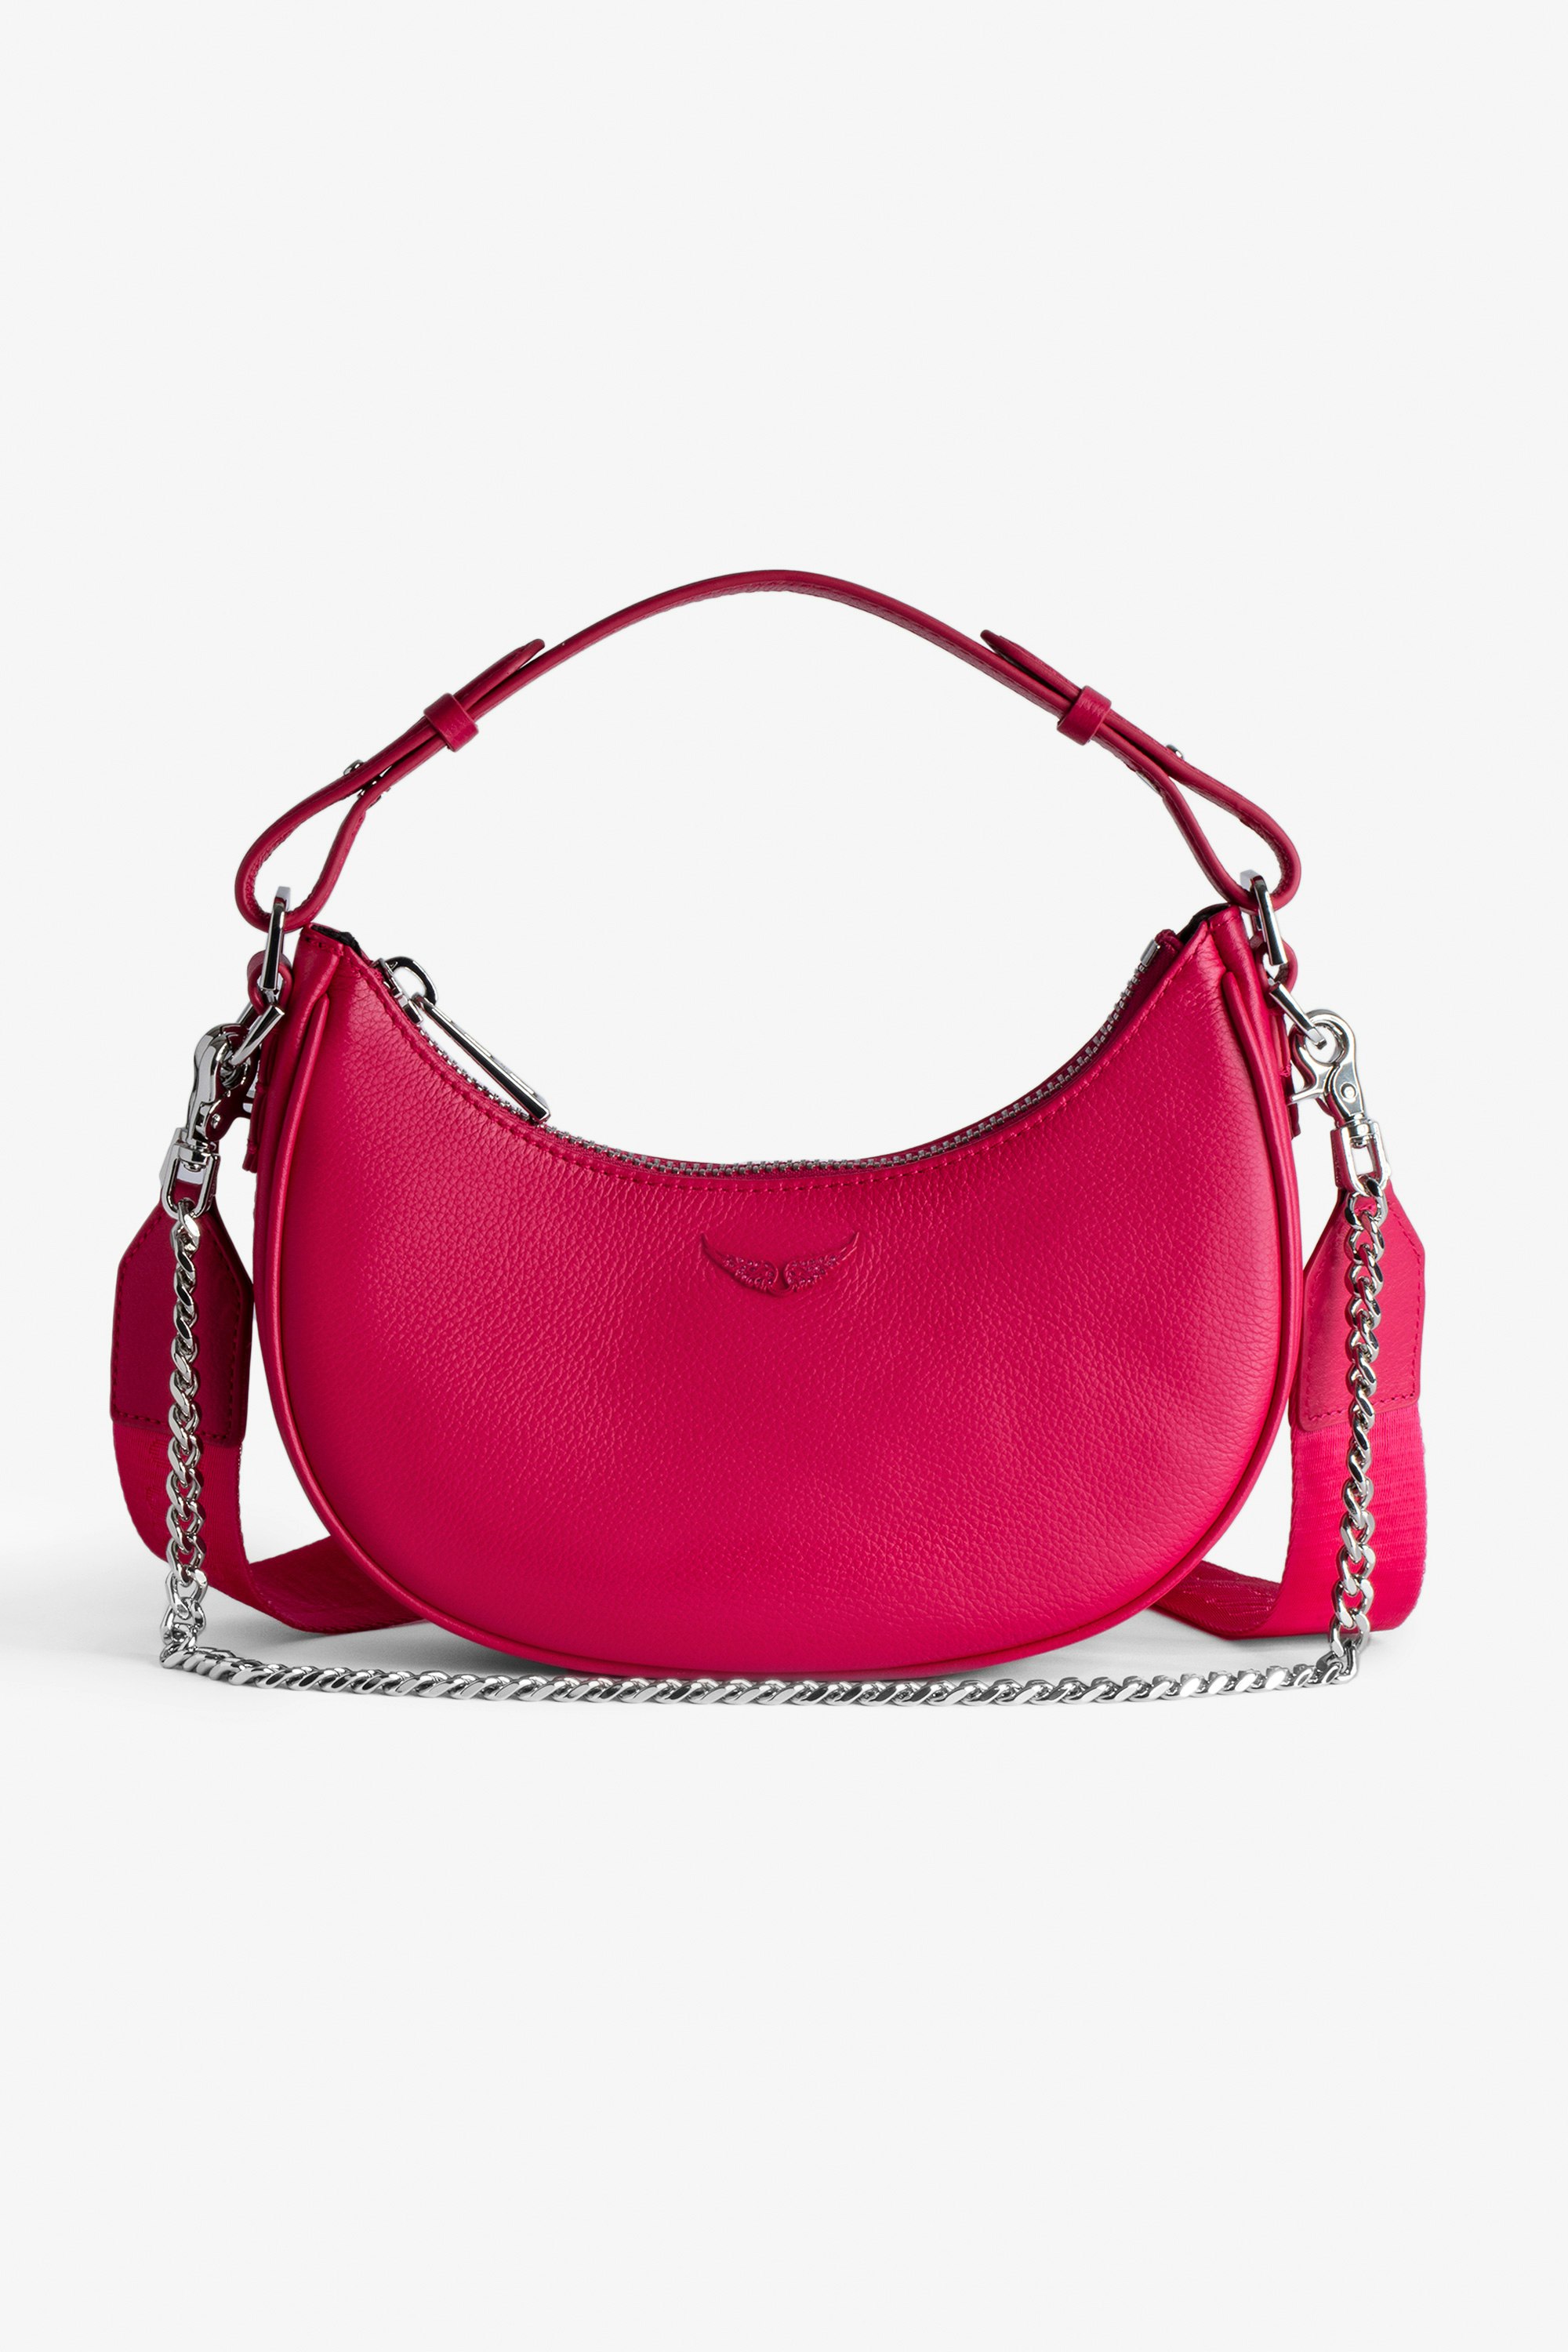 Moonrock Bag - Women’s half-moon bag in pink grained leather with a short handle, shoulder strap, chain and signature wings.